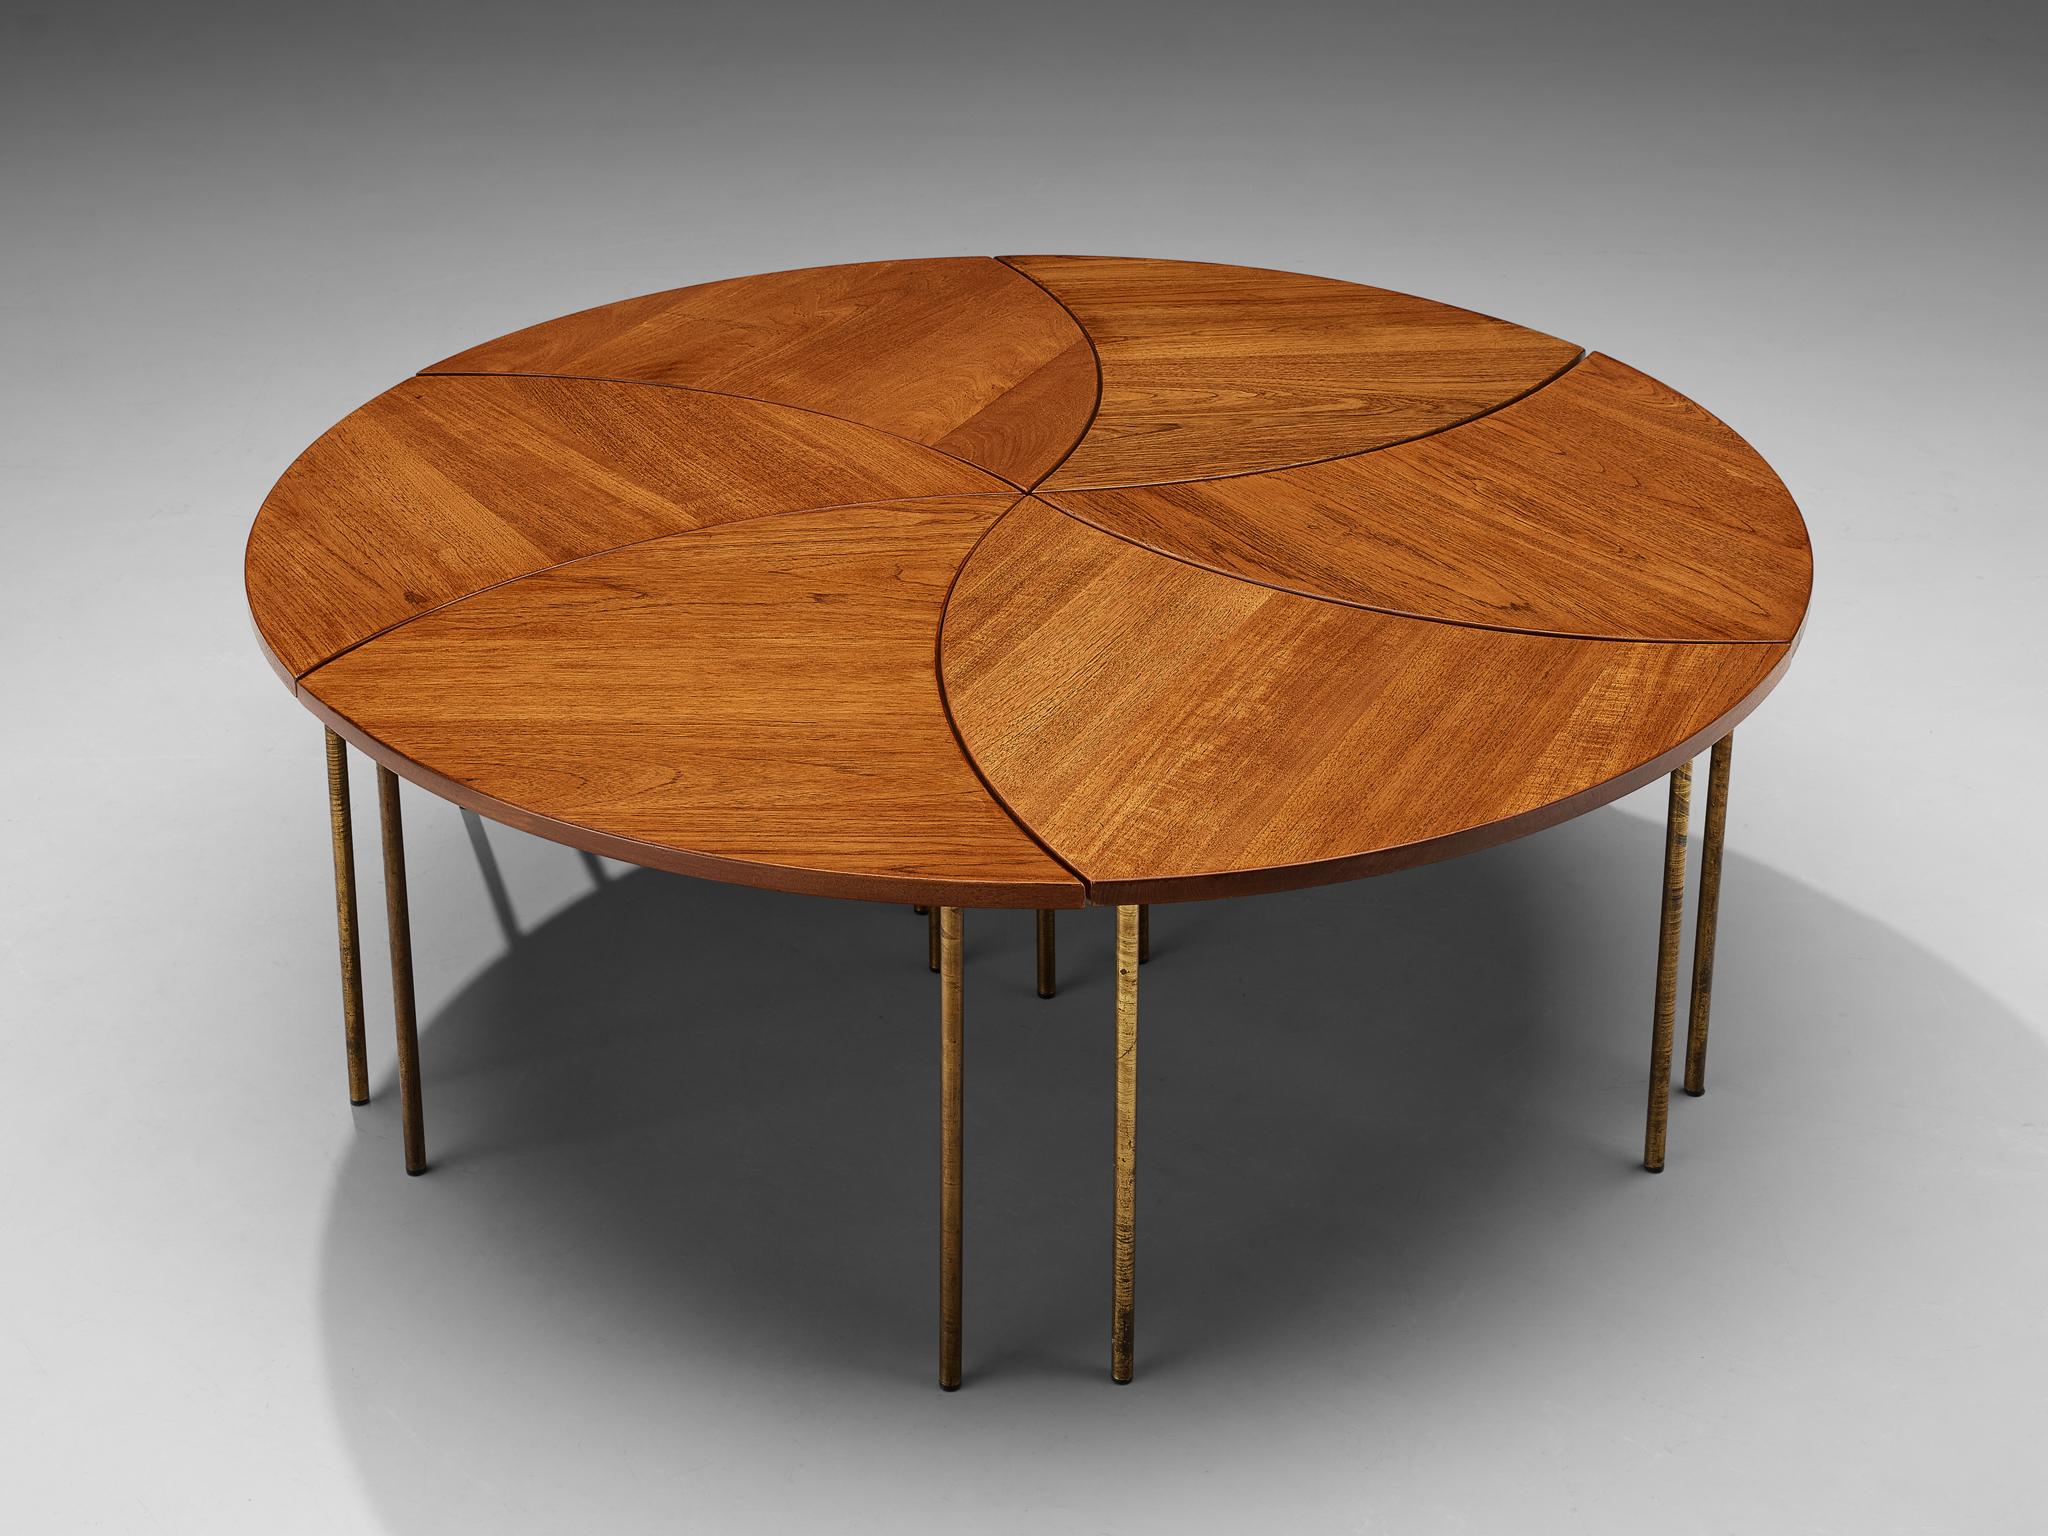 Peter Hvidt and Orla Mølgaard Nielsen coffee table 'FD 523', teak, brass, Denmark, 1952

A modular coffee table, consisting of 6 organic segments in triangular format. Together the six parts can form one large round coffee table or be arranged in